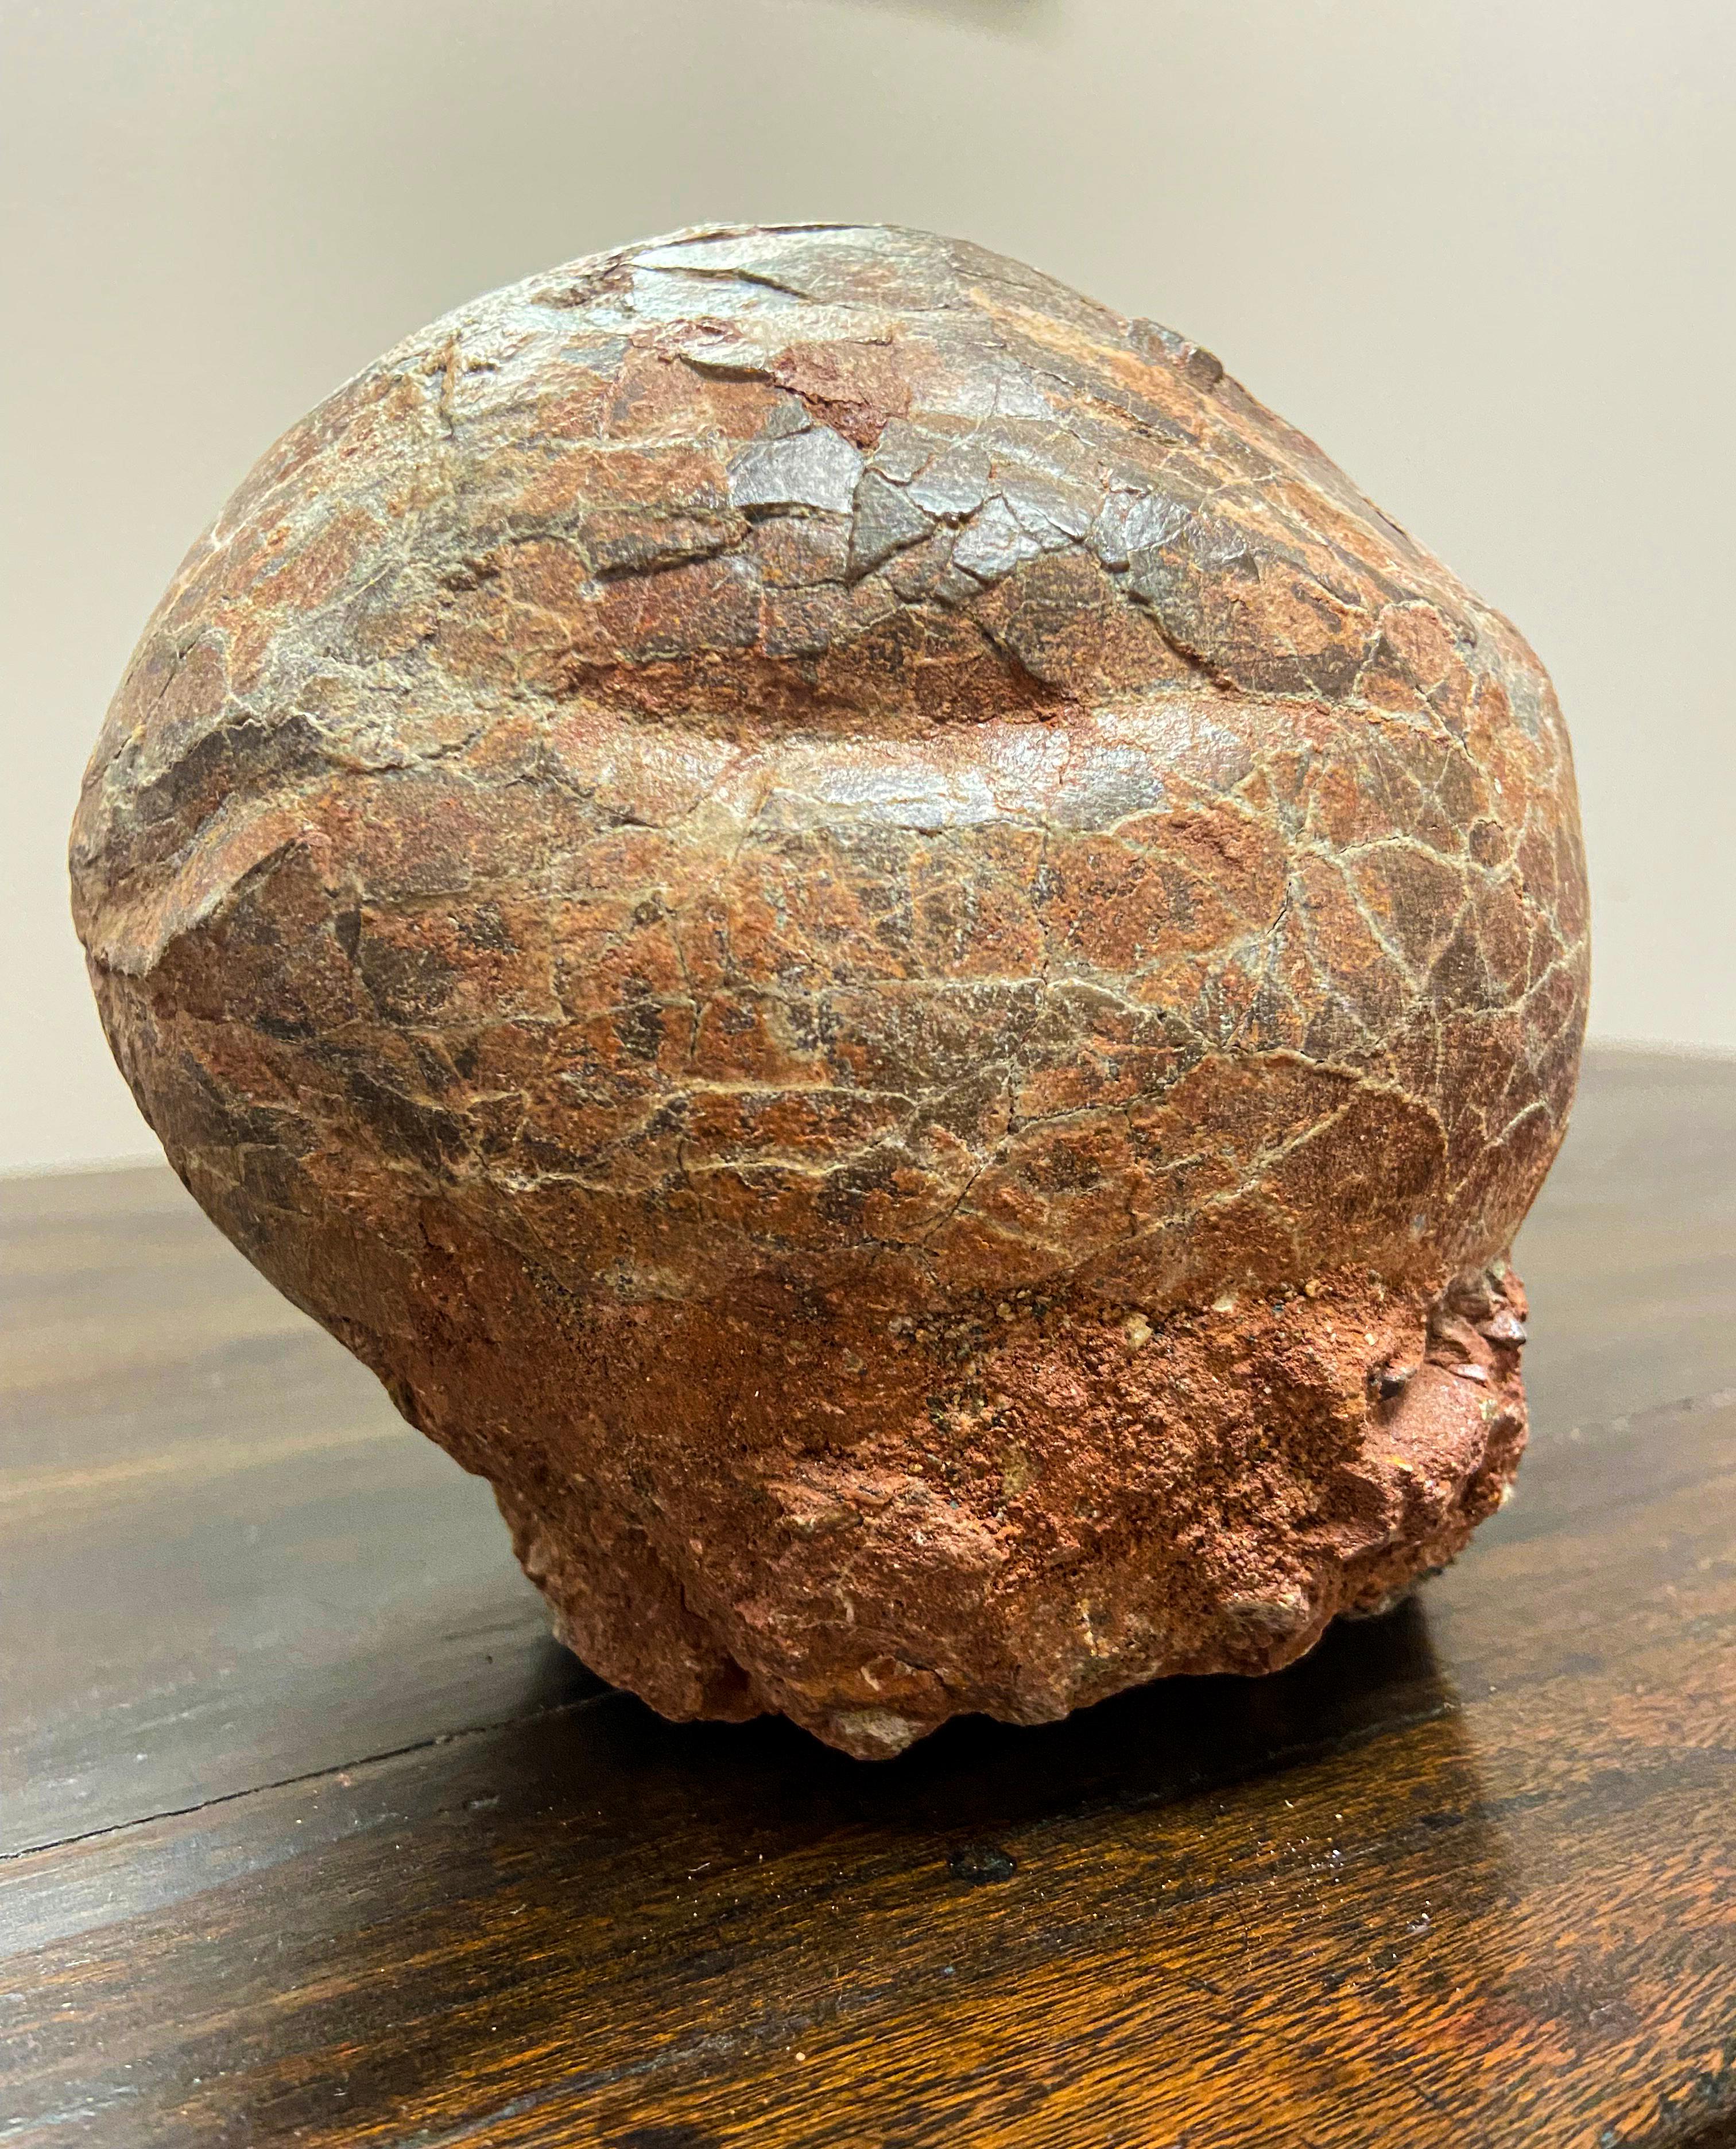 A true gem. This is a set of 2 petrified dinosaur eggs together in one solid nest. Boasting a nicely weathered appearance easily explained by its tremendous age, this petrified dinosaur egg nest will make for an excellent gift idea! With its unique